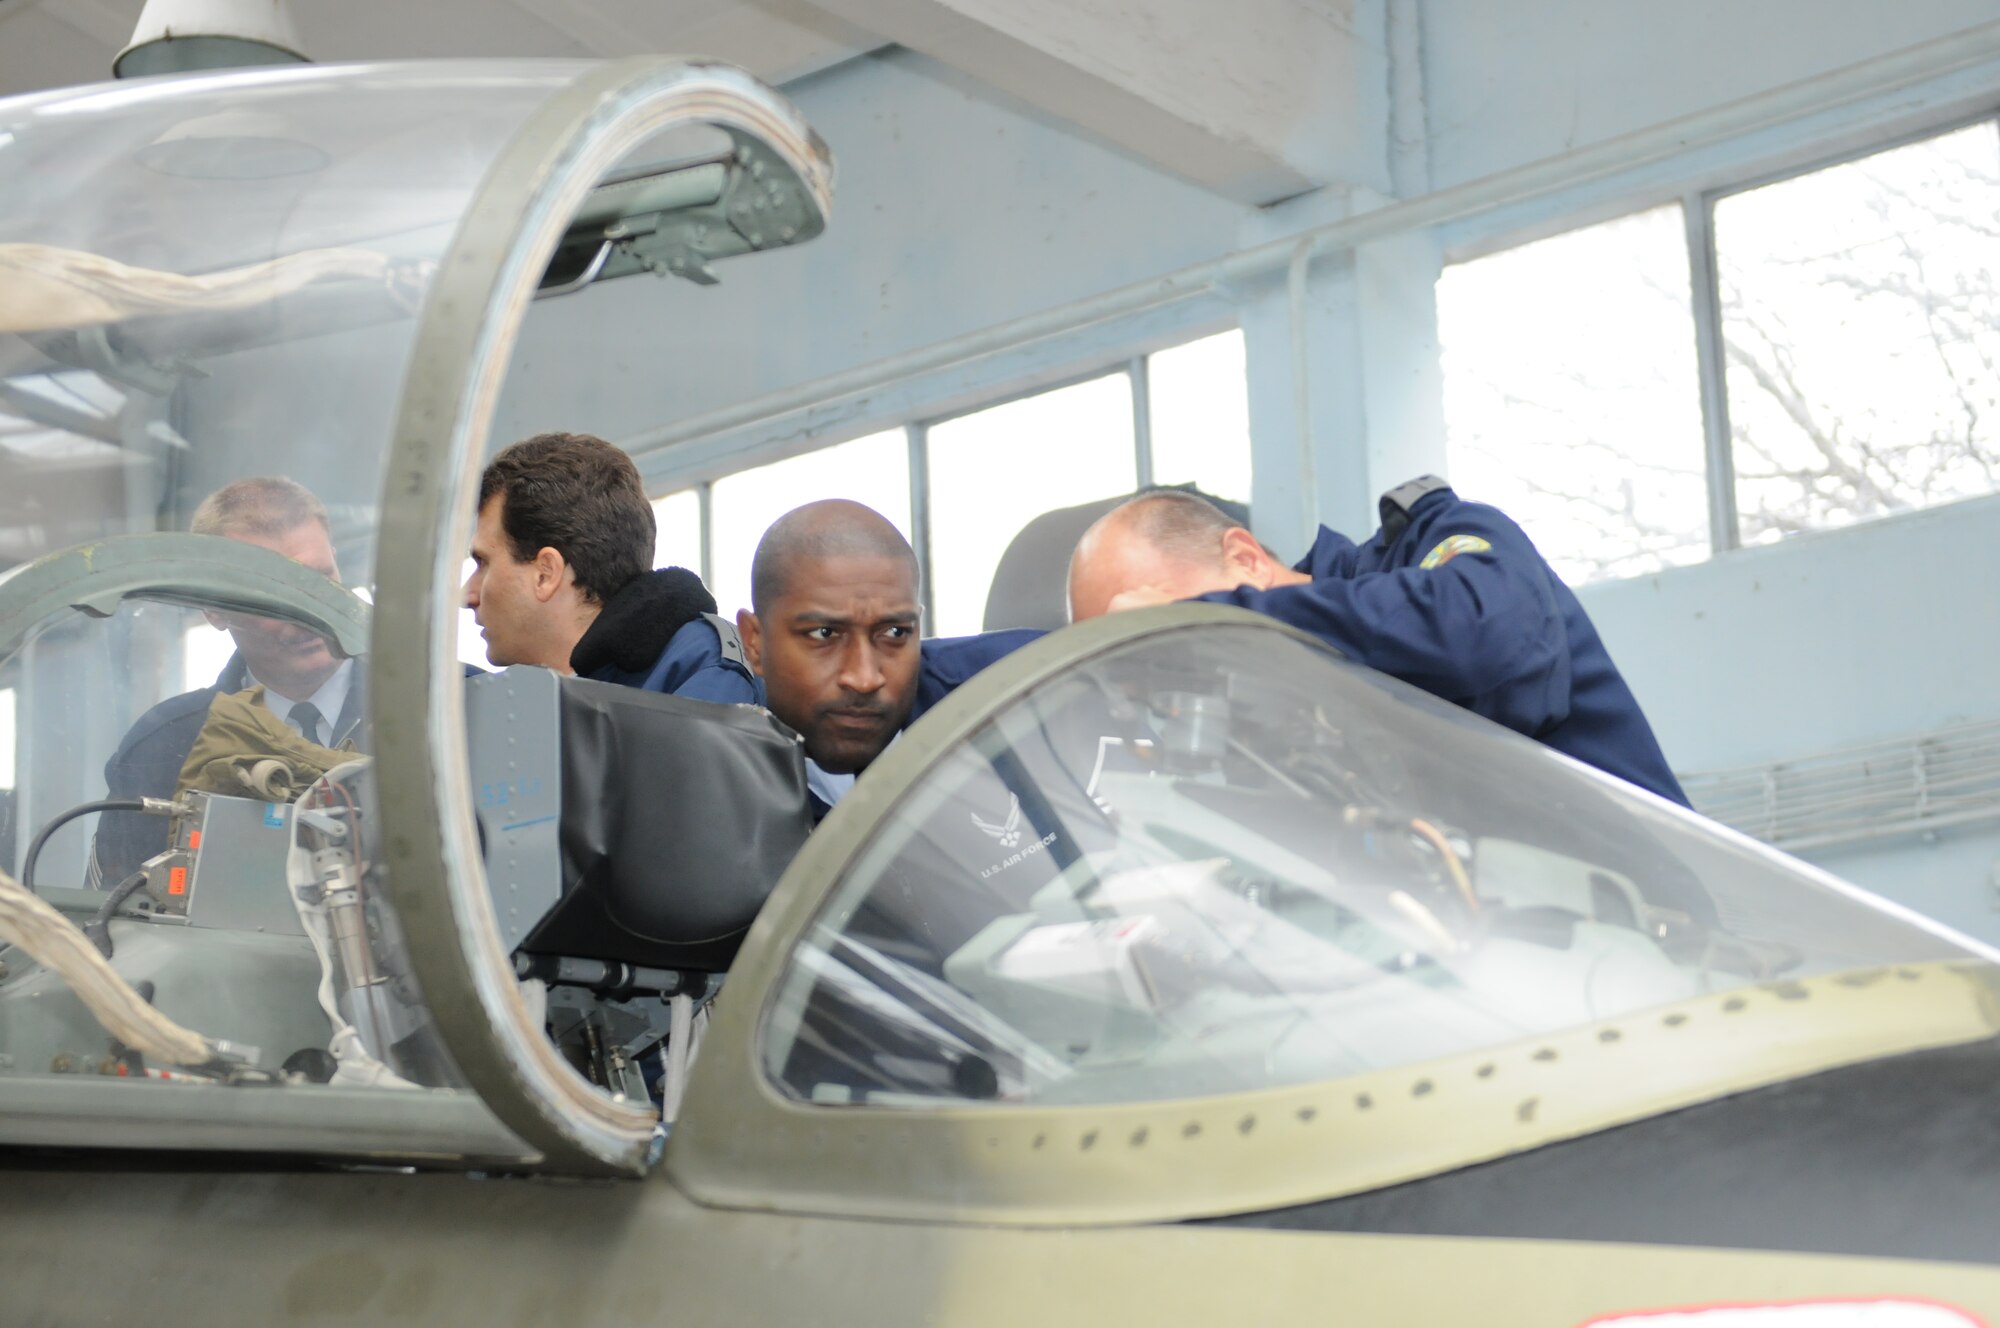 Master Sgt Timothy Barfield, USAFE command chief executive assistant, learns about the capabilities of Bulgarian training aircraft during a visit to Dolna Mitropolya Air Force Training Base, in Bulgaria Nov. 6. (U.S. Air Force photo by MSgt Gino Mattorano)